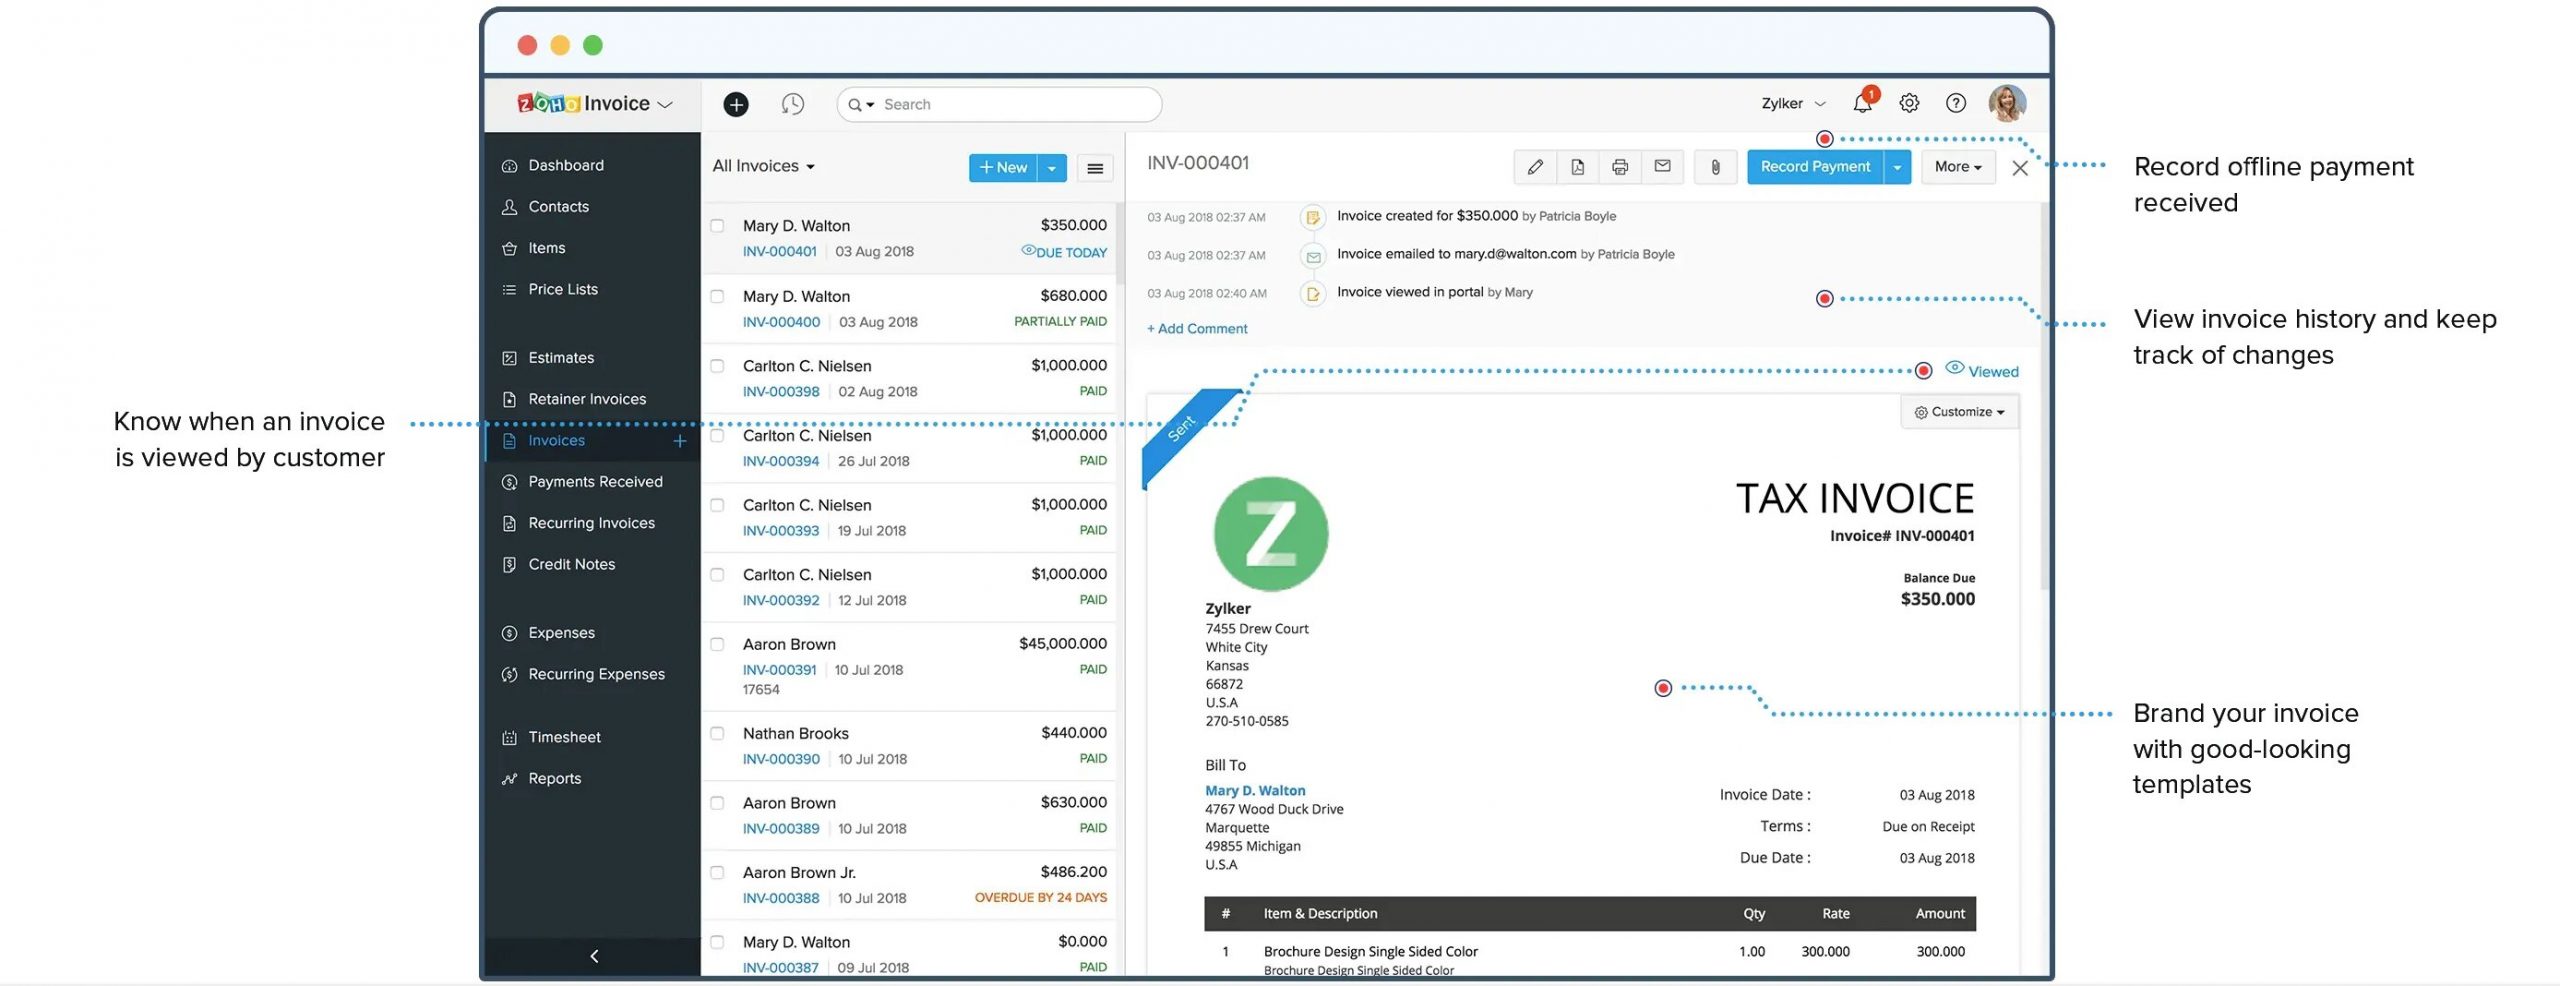 An example of Zoho Invoice’s dashboard